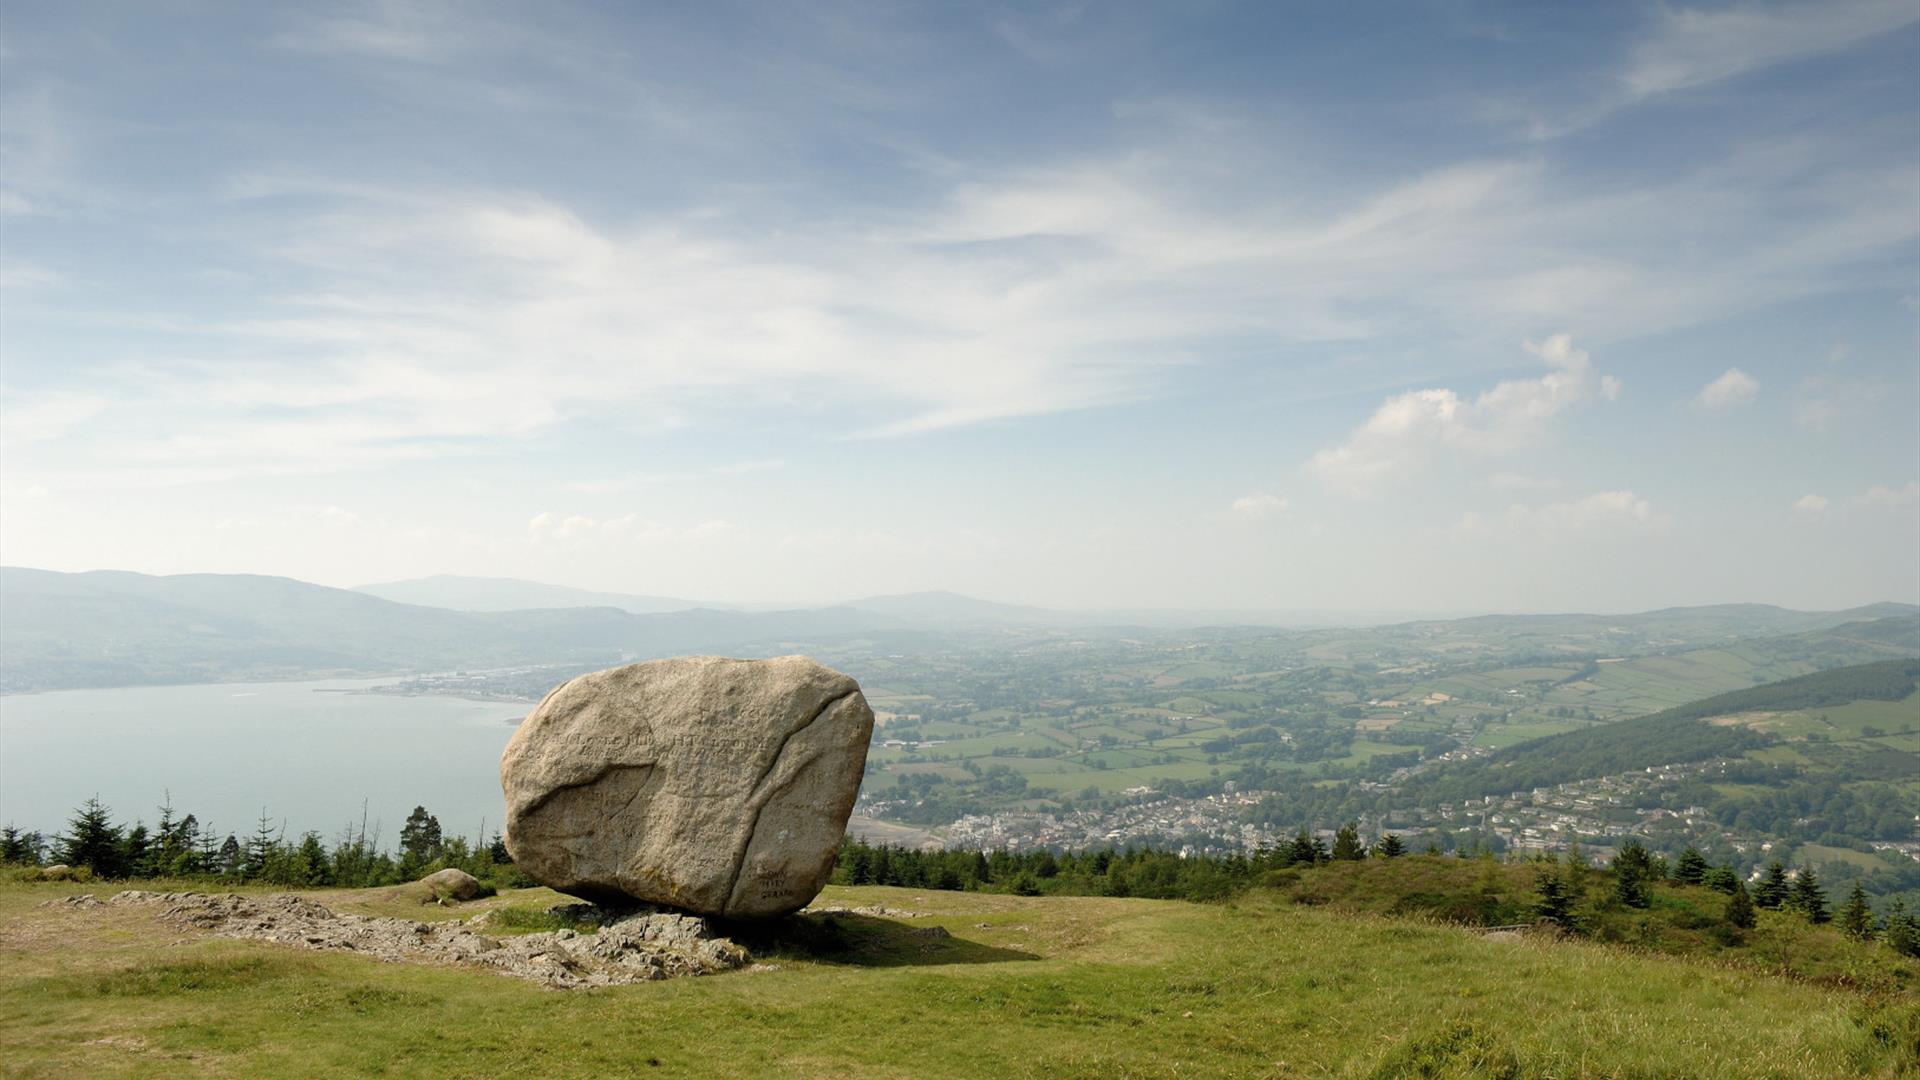 View from the Cloughmore Stone